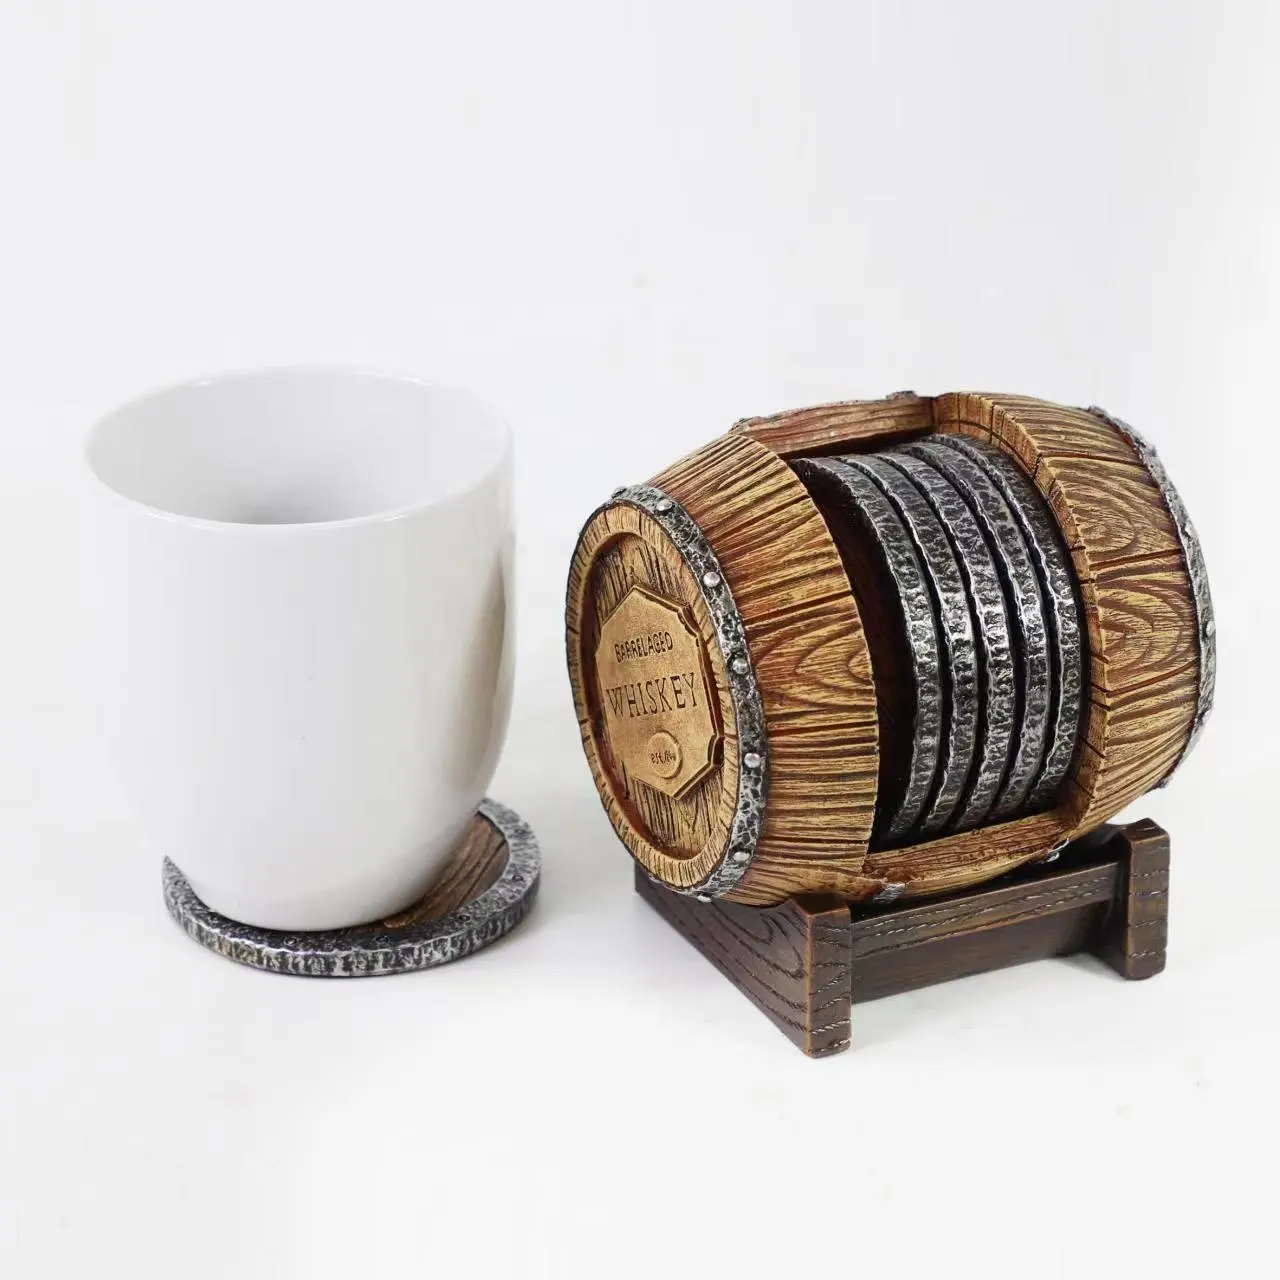 Whiskey Barrel Drink Coasters Unique Bar Decor and Accessories Beer Coaster Home Decorations for Dining Room Drink Coasters